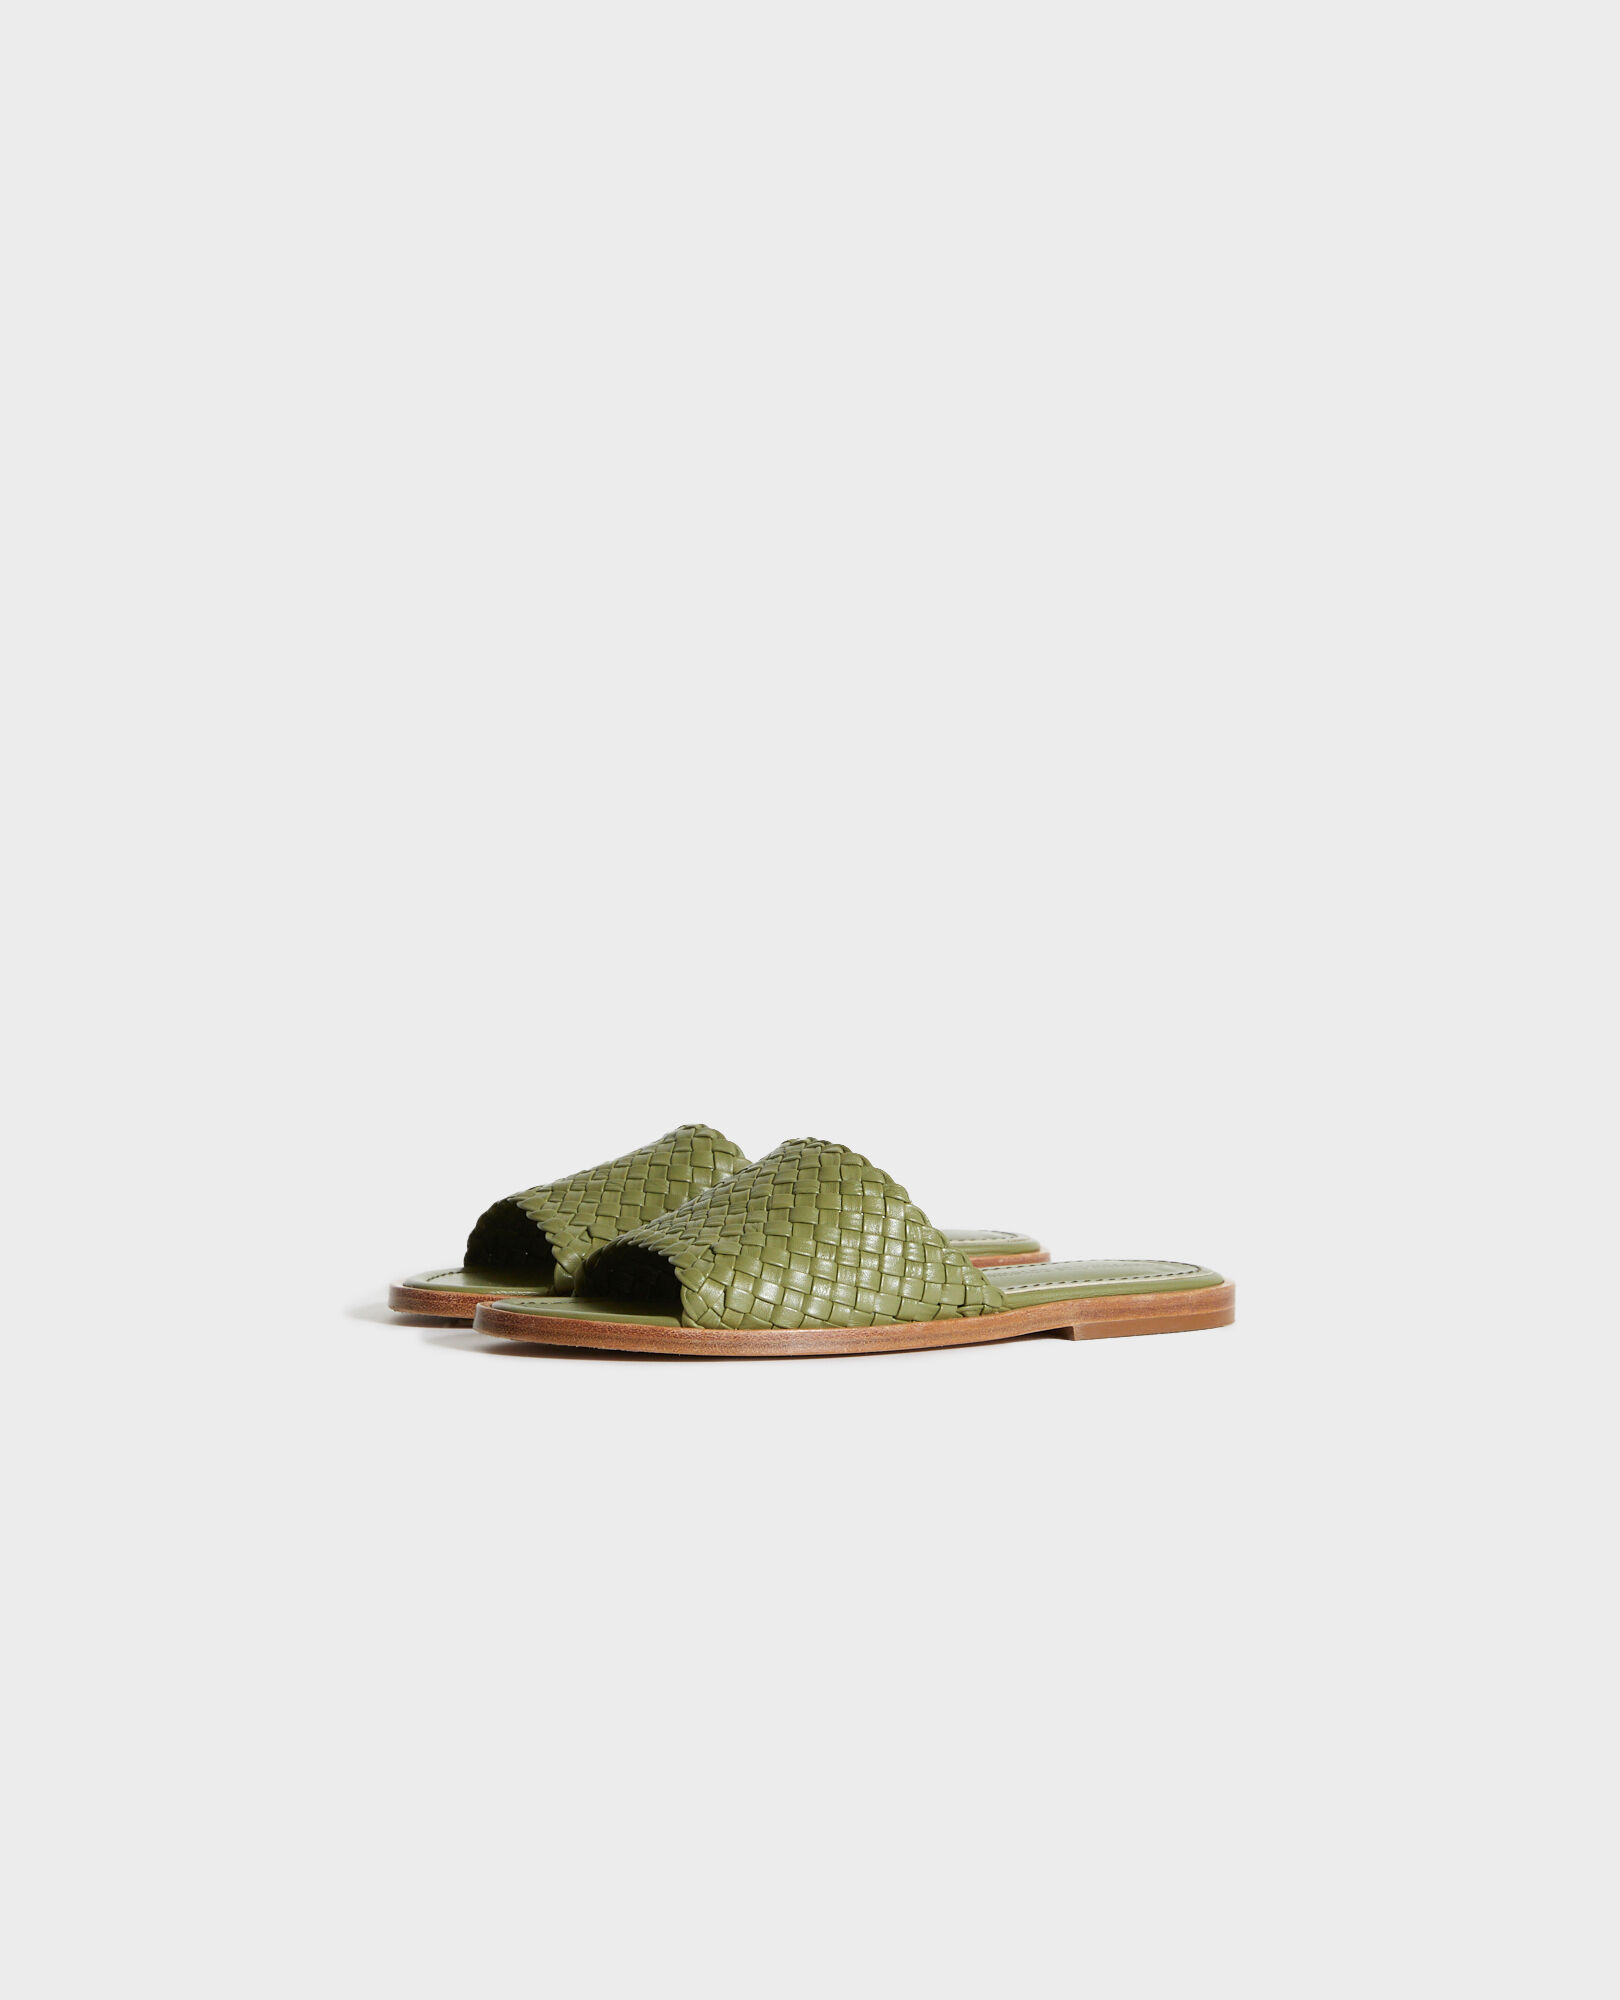 PAM - Leather sandals 58 green 2ss22354